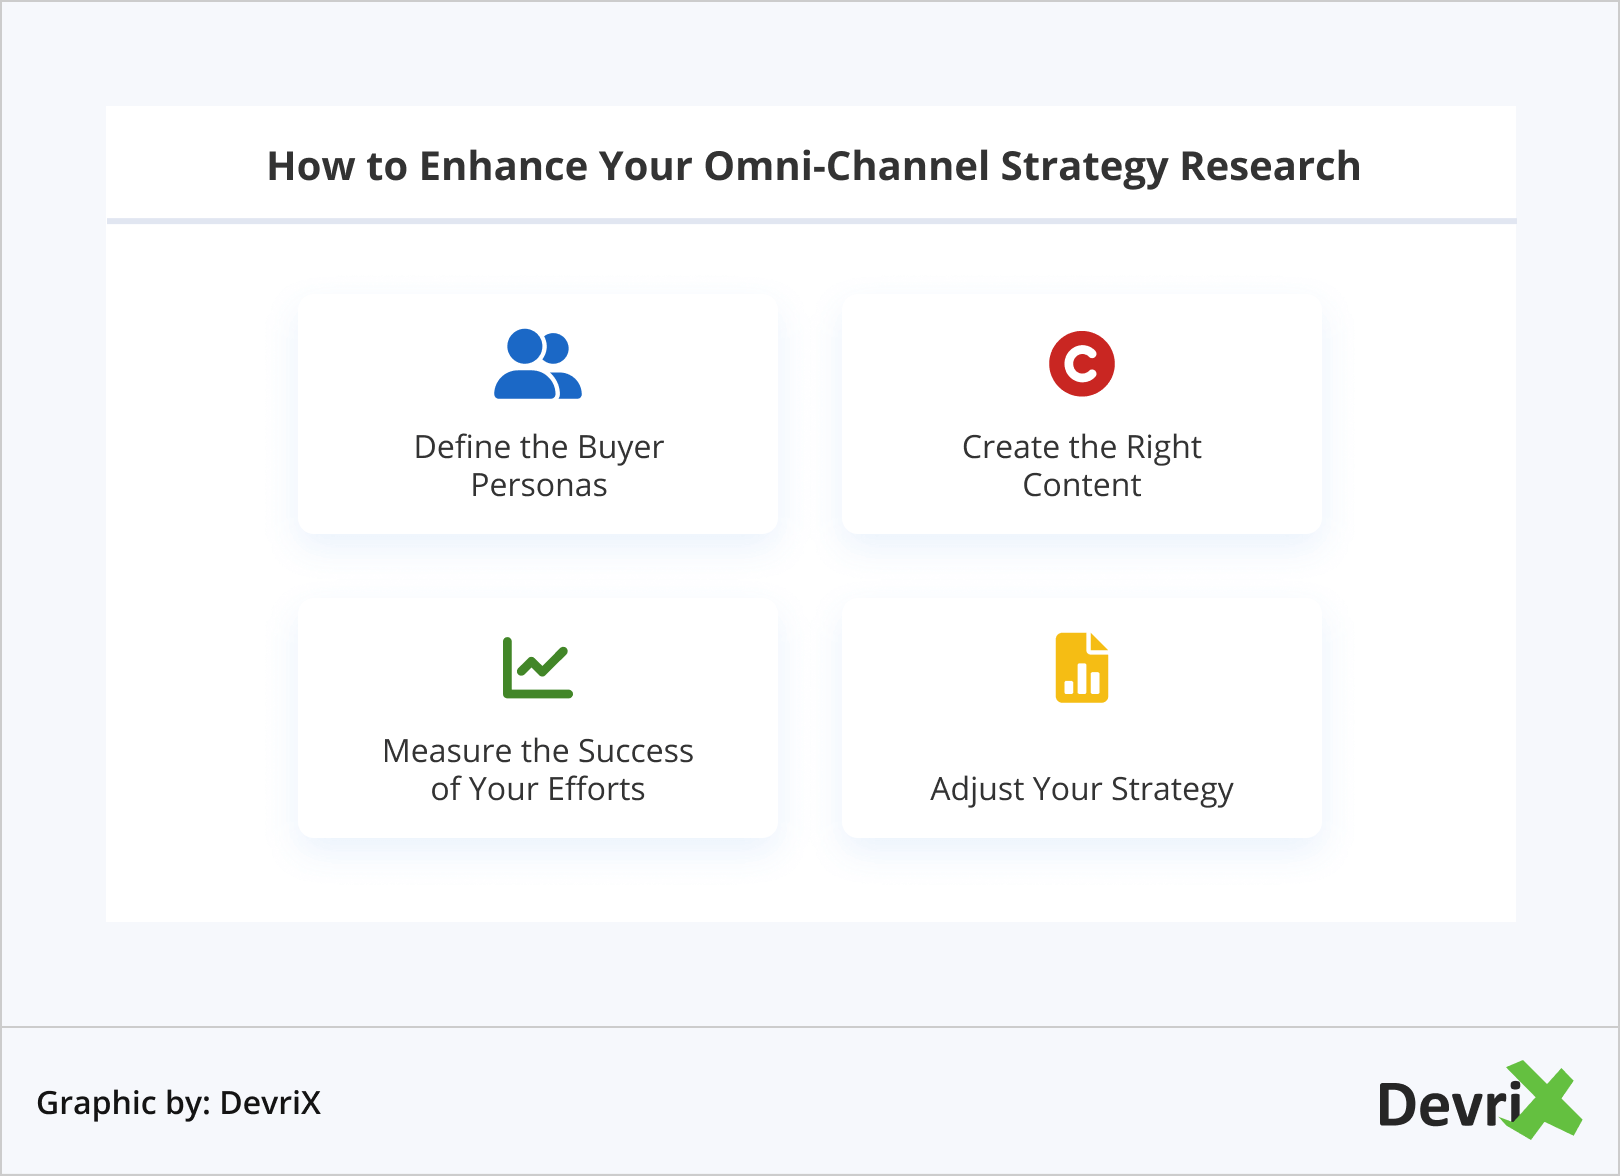 How to Enhance Your Omni-Channel Strategy Research